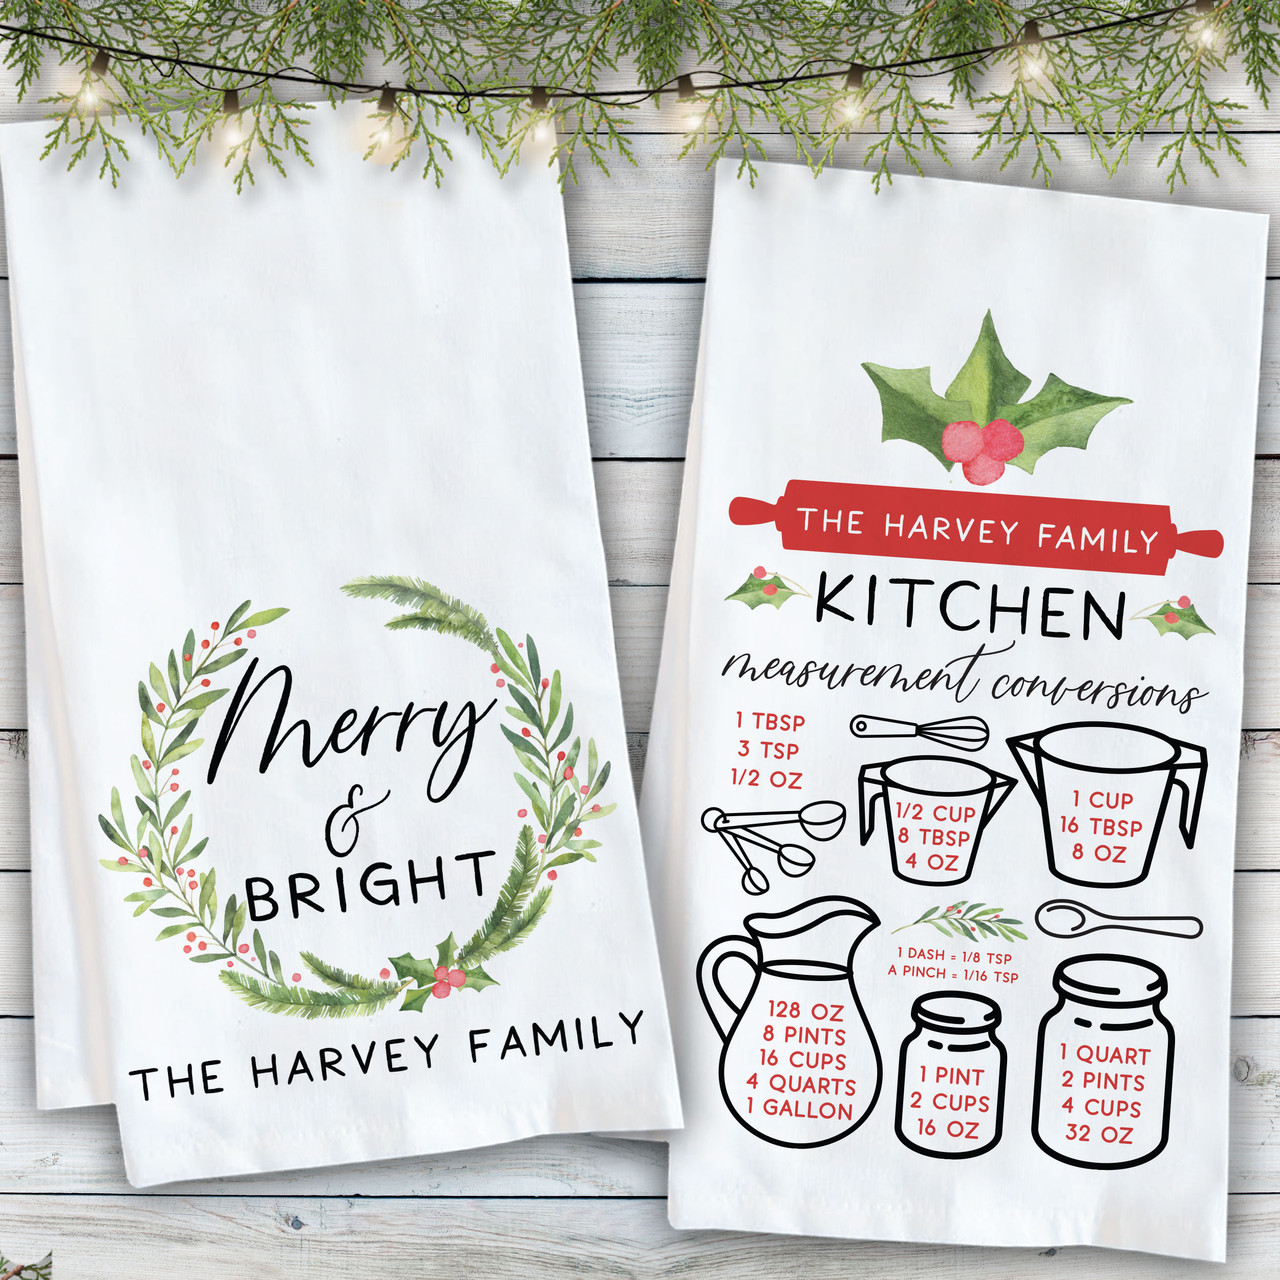 https://cdn11.bigcommerce.com/s-5grzuu6/images/stencil/1280x1280/products/4782/50752/Merry-and-Bright-Christmas_Kitchen-Towel_Personalized__25915.1666732263.1280.1280__58382.1666732331.jpg?c=2